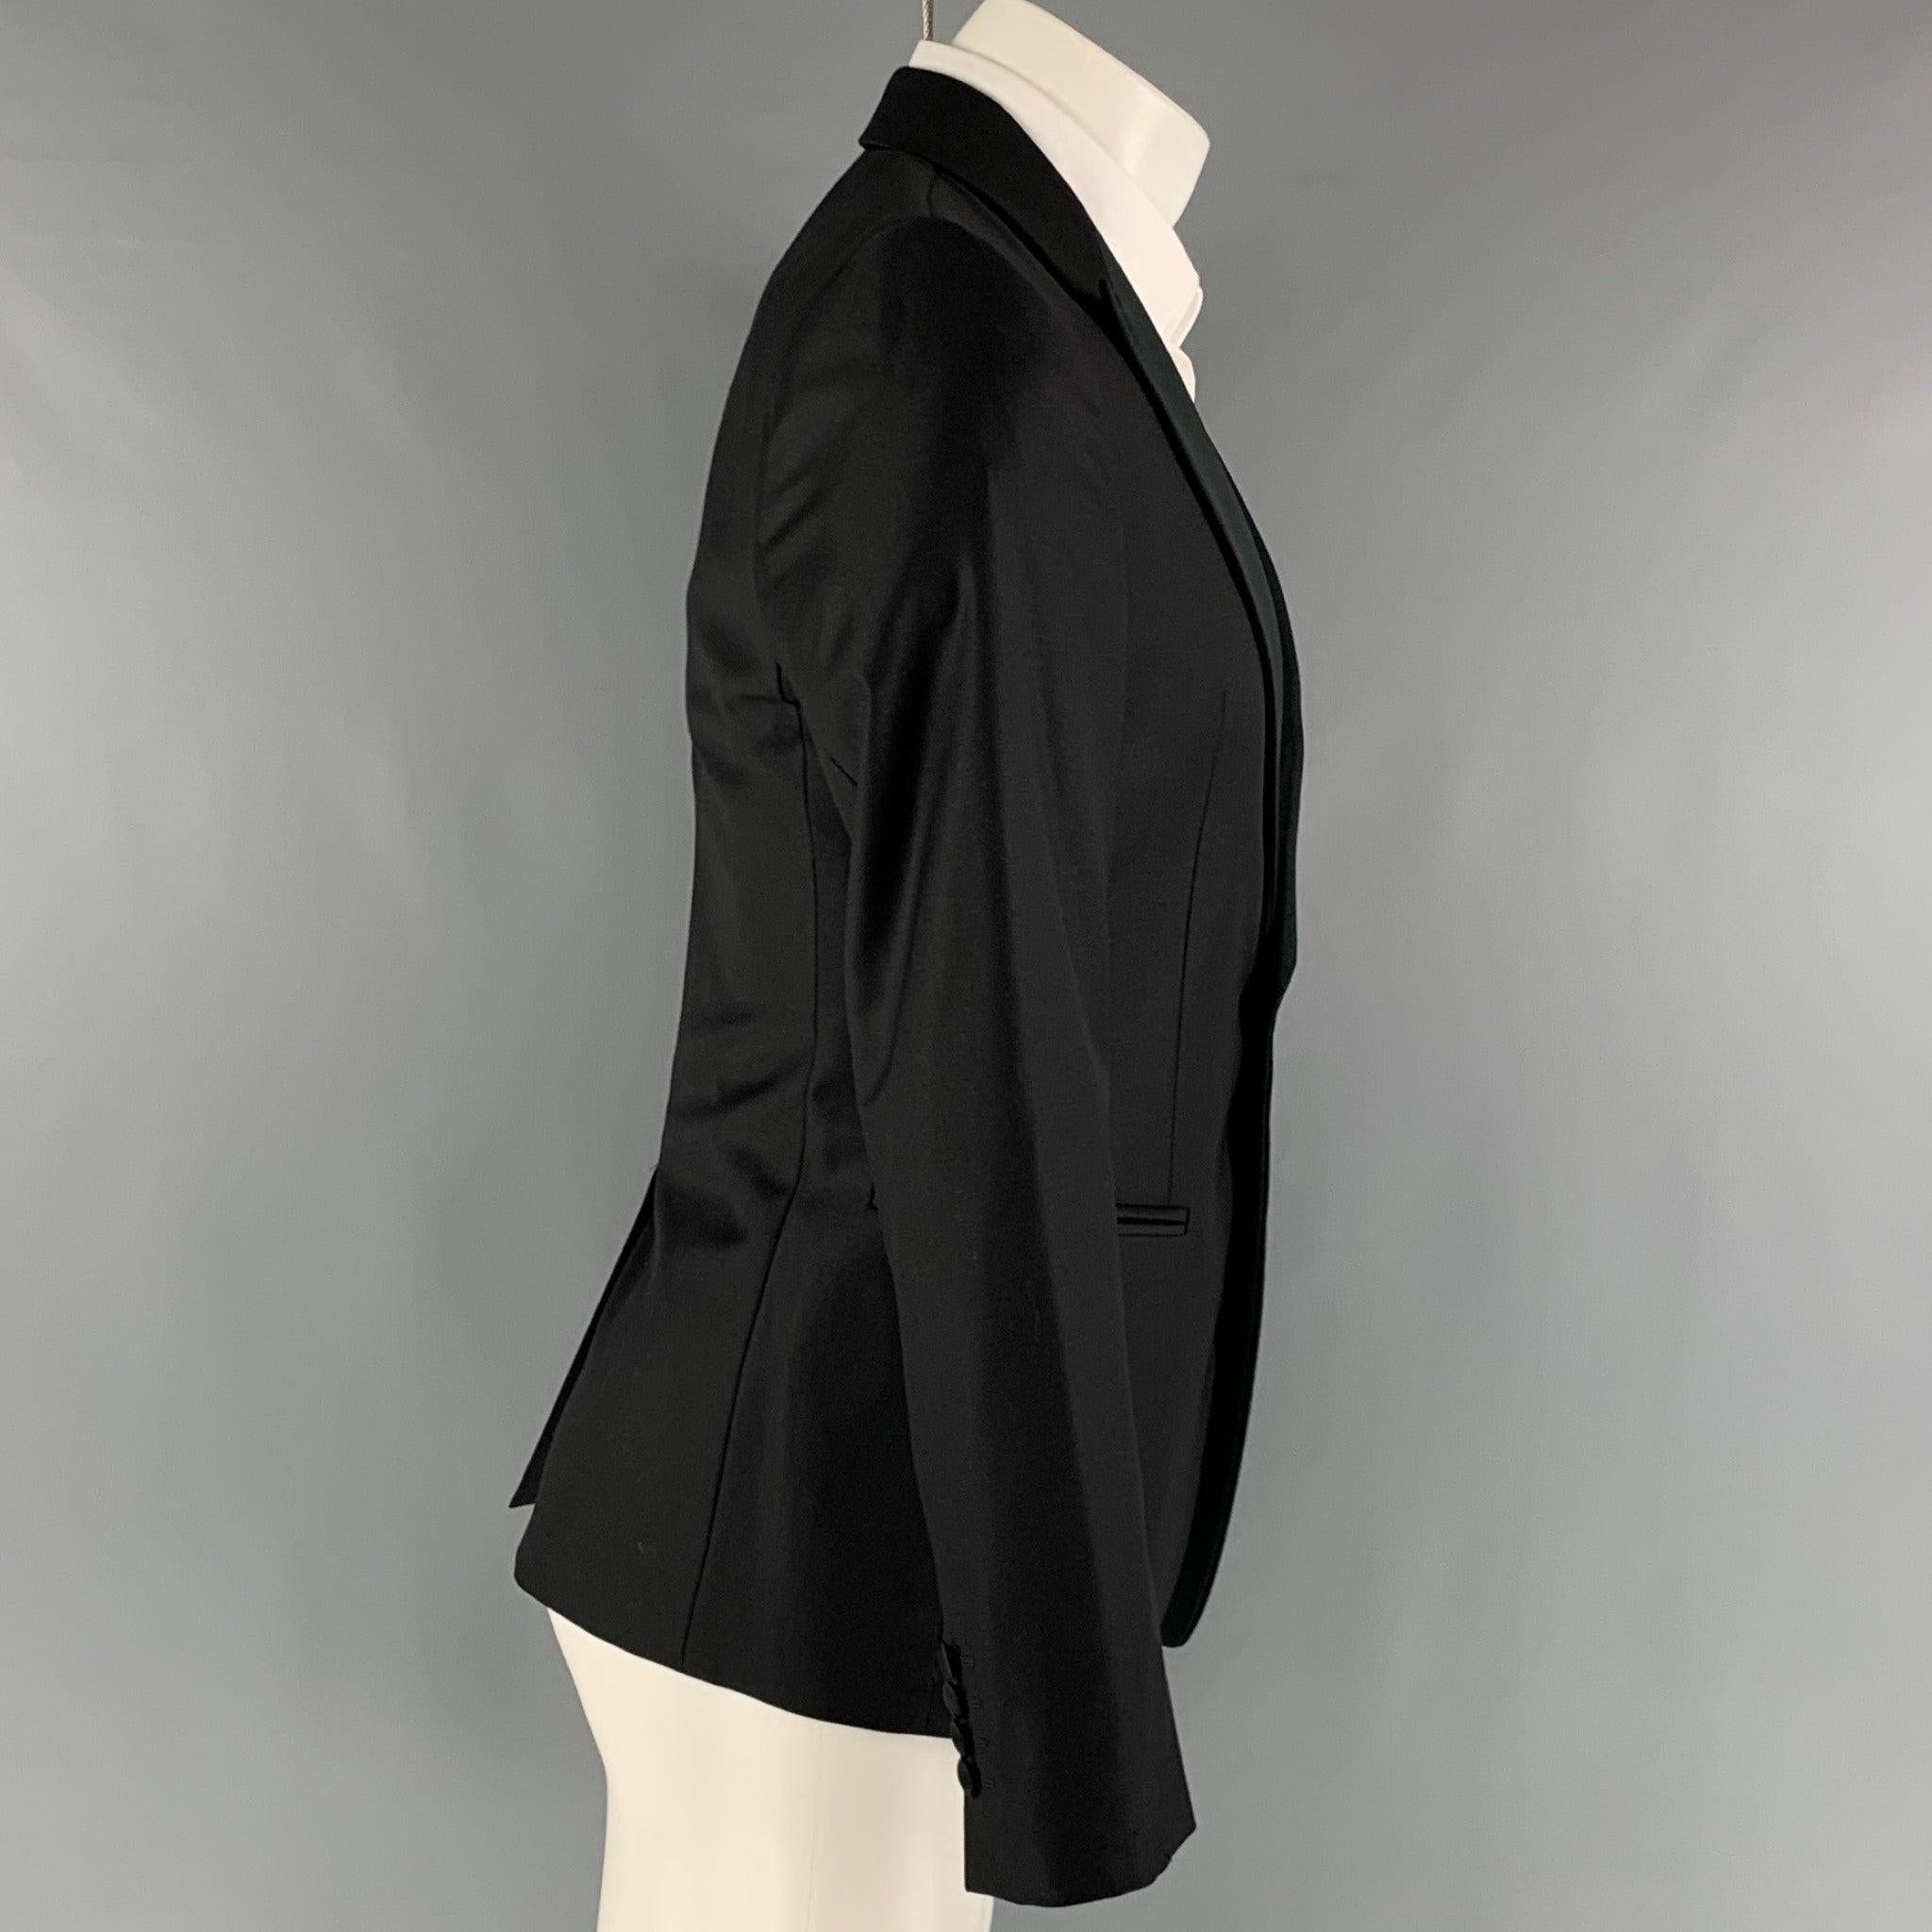 EMPORIO ARMANI tuxedo sport coat comes in a black wool woven material with a full liner featuring a peak lapel, welt pockets, and a single button closure. Made in Italy. Very Good Pre-Owned Condition.
Minor signs of wear. 

Marked:   46